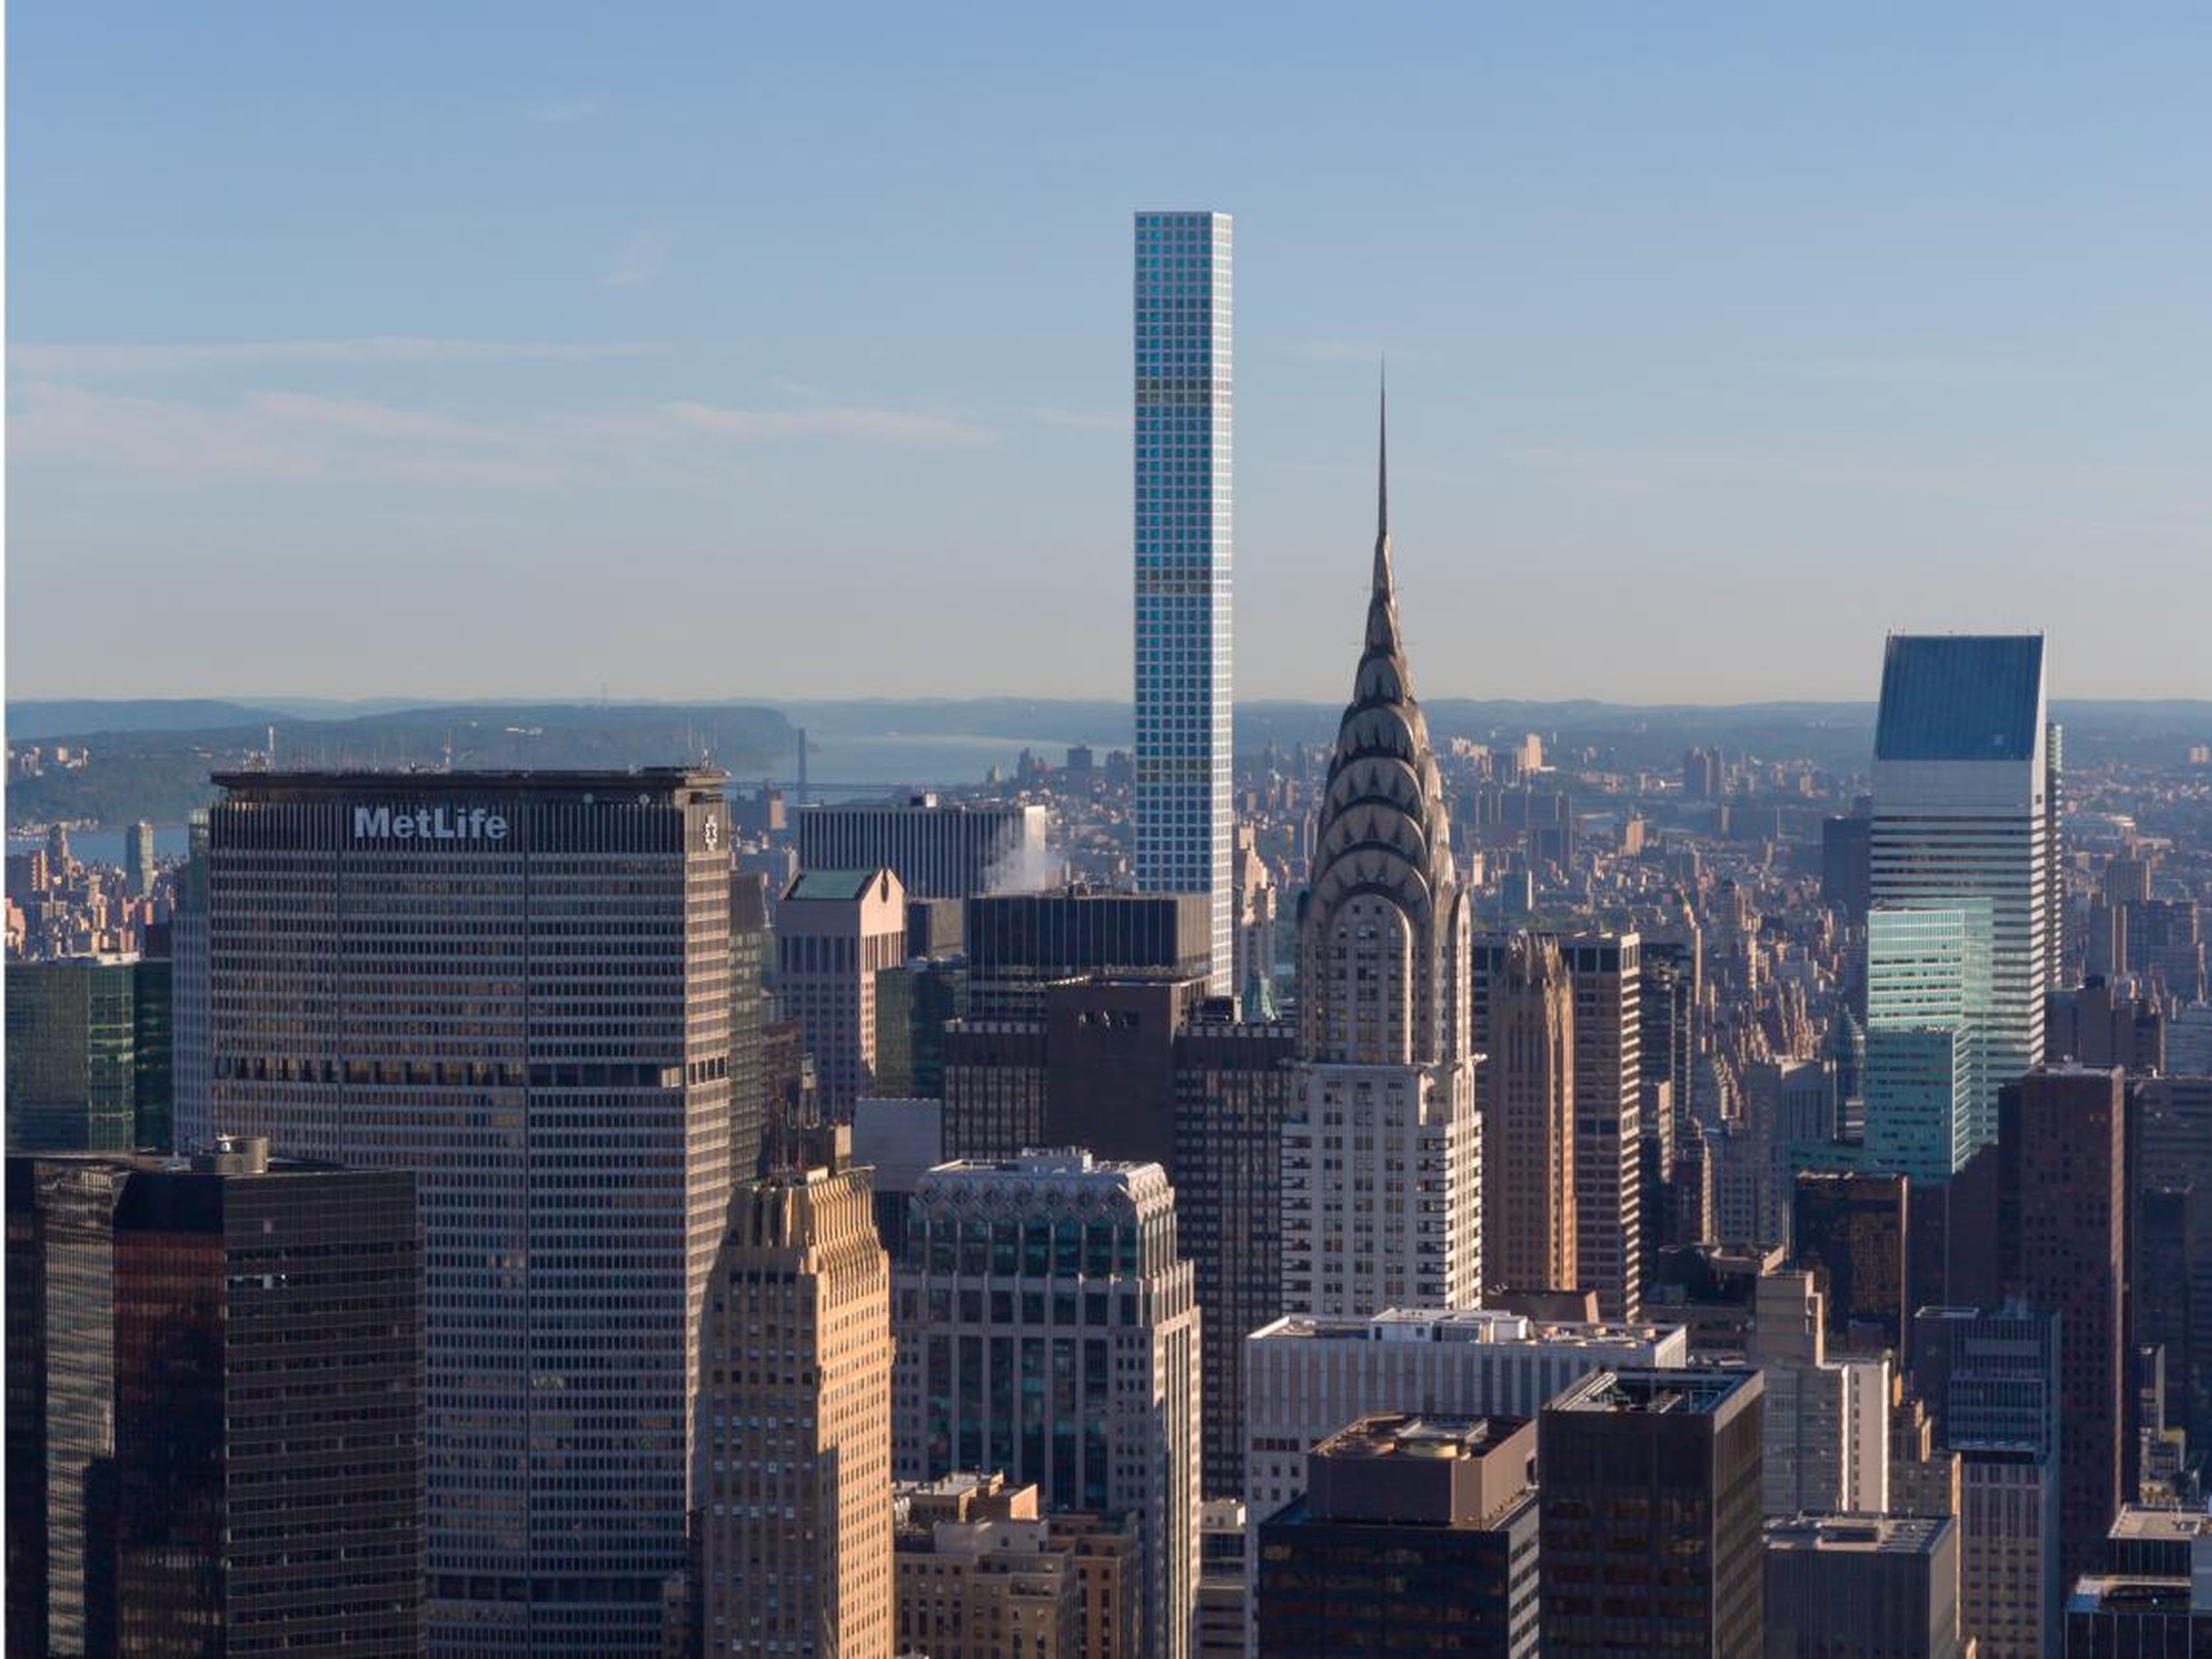 432 Park was completed in 2015 amid criticism from some New Yorkers who felt it looked ugly and out of place in the city skyline.